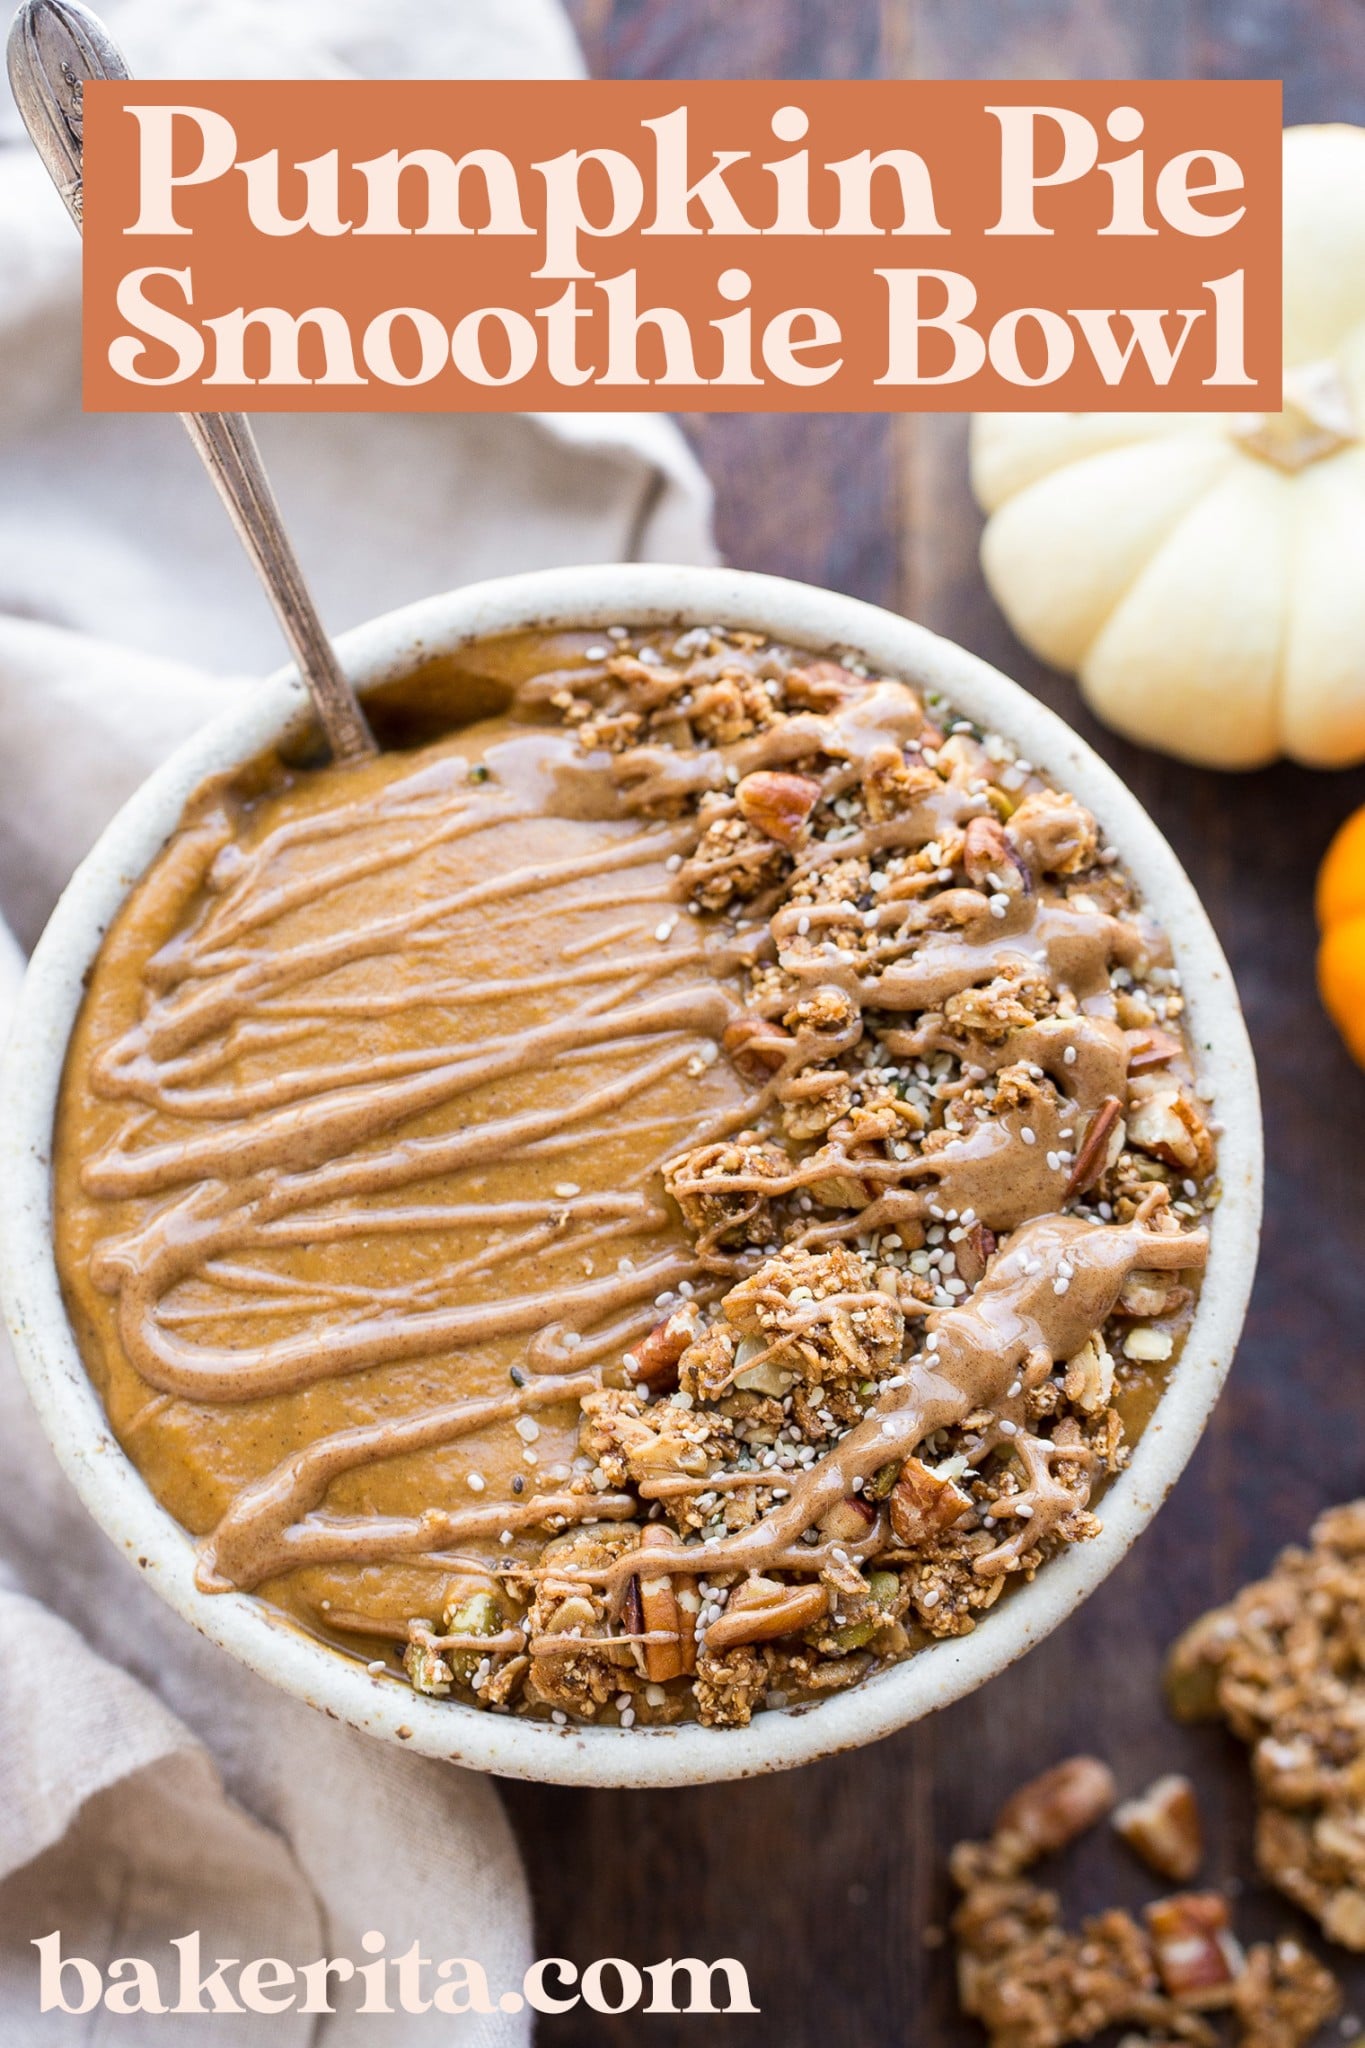 This Pumpkin Pie Smoothie Bowl tastes like a smoothie version of pumpkin pie filling! It's loaded with veggies for a filling, nutrient-dense breakfast that's bursting with fall spices. It's gluten-free, paleo, vegan and Whole30.